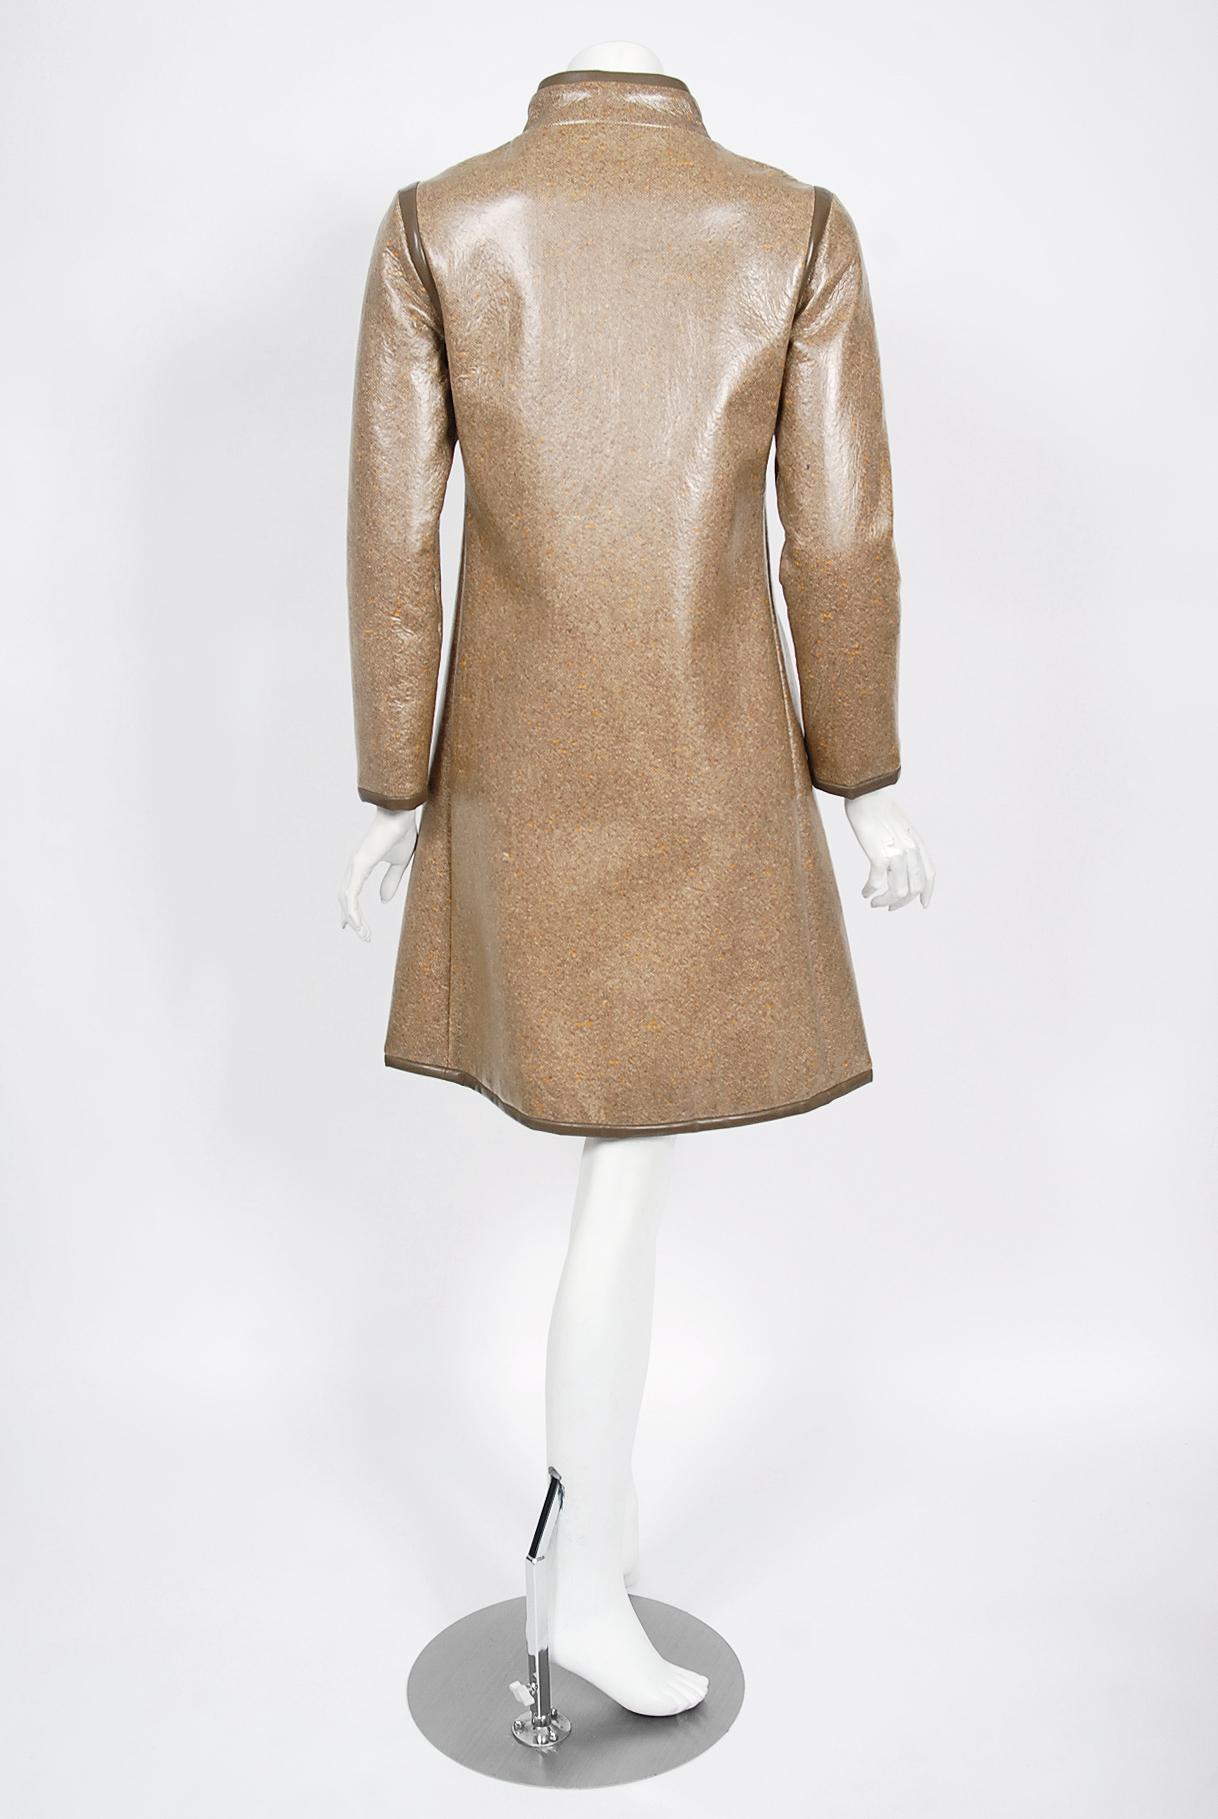 Vintage 1968 Pierre Cardin Documented Vinyl Tweed Space-Age Mod Trench Jacket  For Sale 3